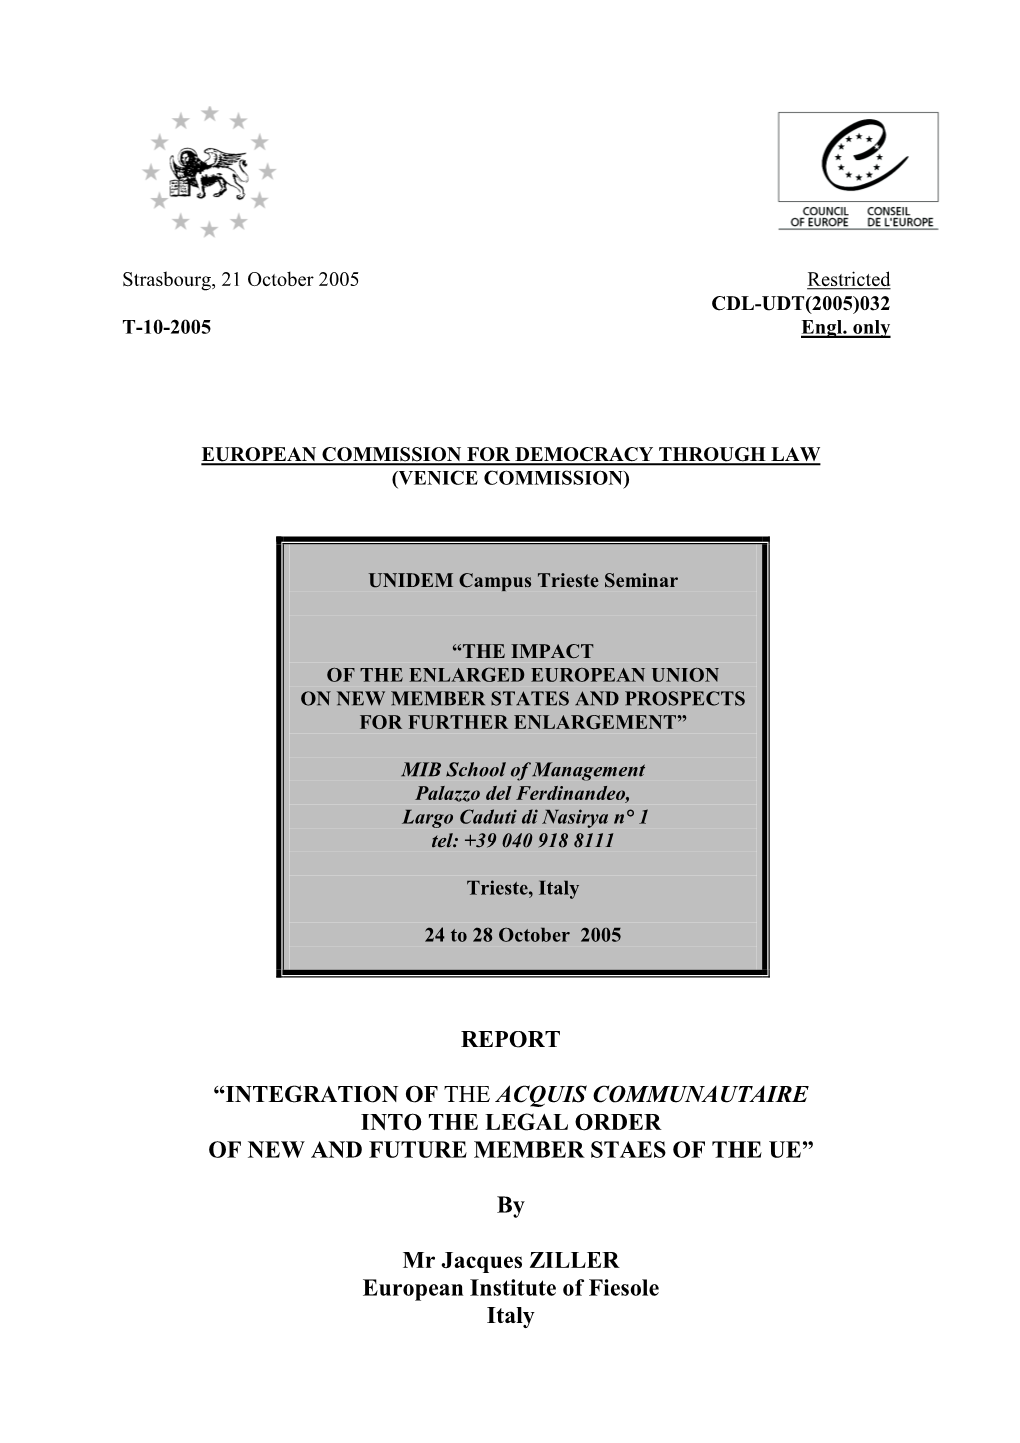 Report “Integration of the Acquis Communautaire Into